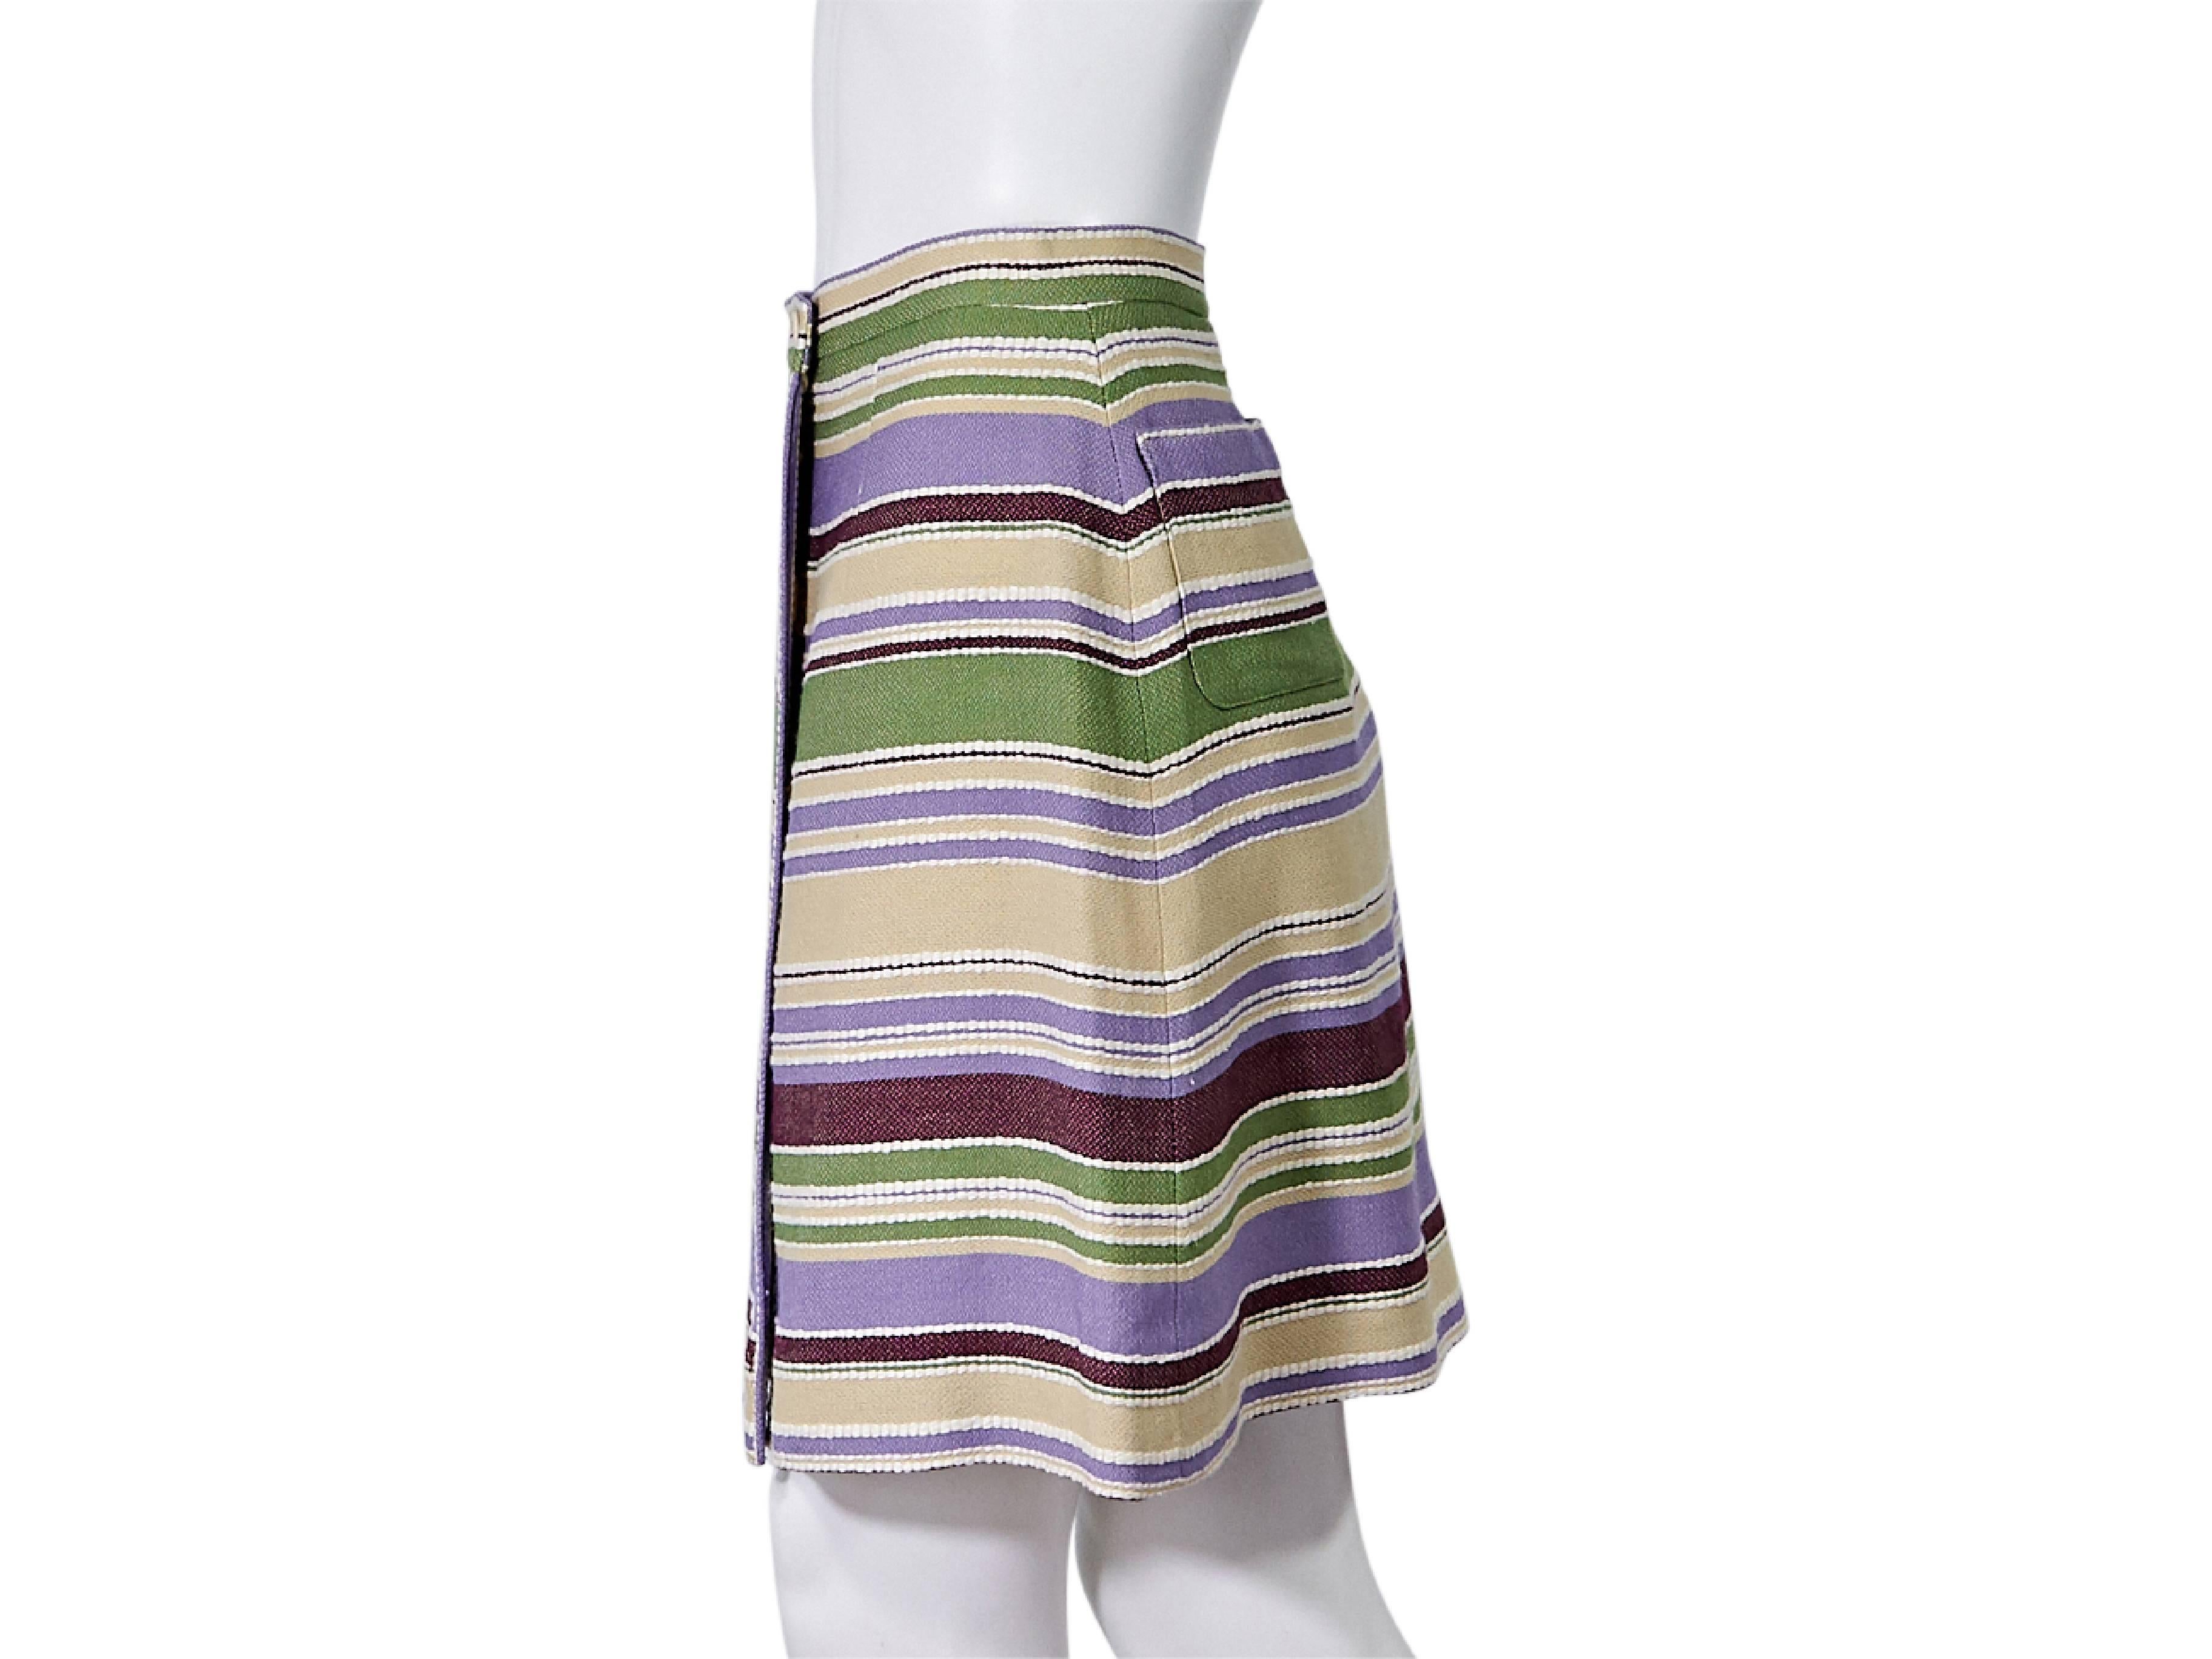 Product details:  Multicolor striped wool-blend skirt by Chanel.  A-line silhouette.  Banded waist.  Button-front closure.  Side patch pockets.  
Condition: Pre-owned. Very good.
Est. Retail: $ 1,500.00